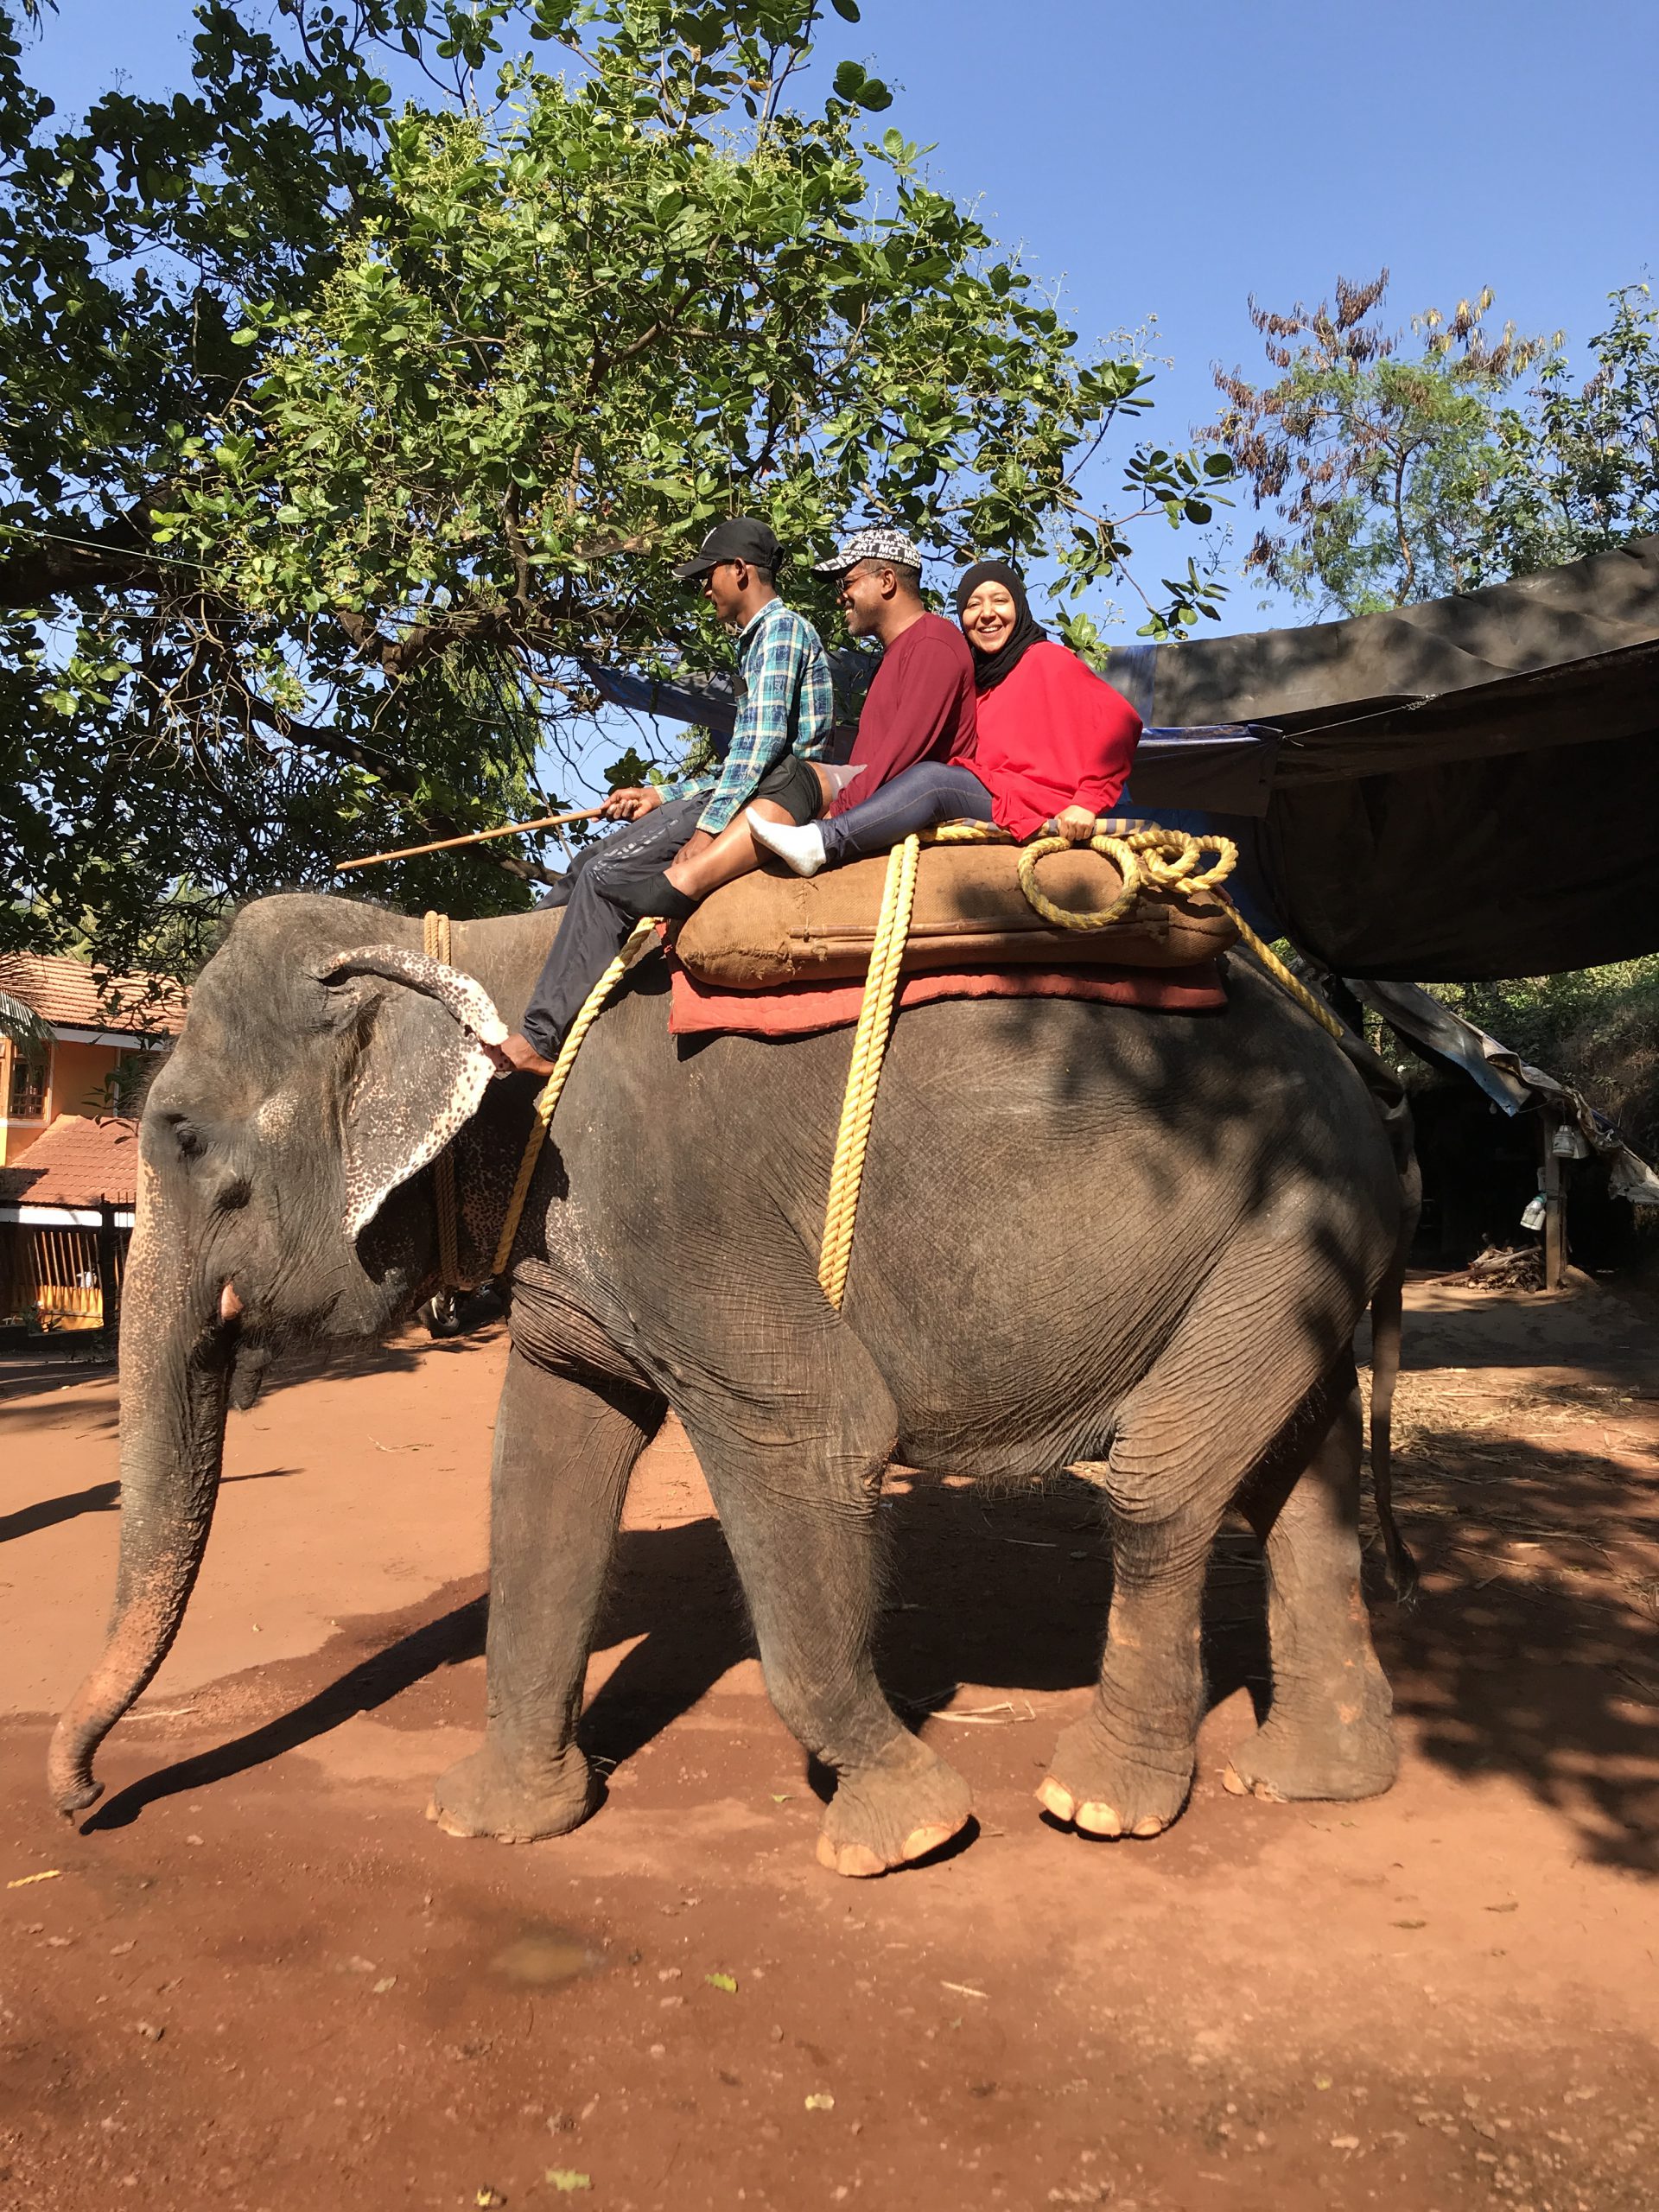 Elephant ride in Goa on NEw Year's eve